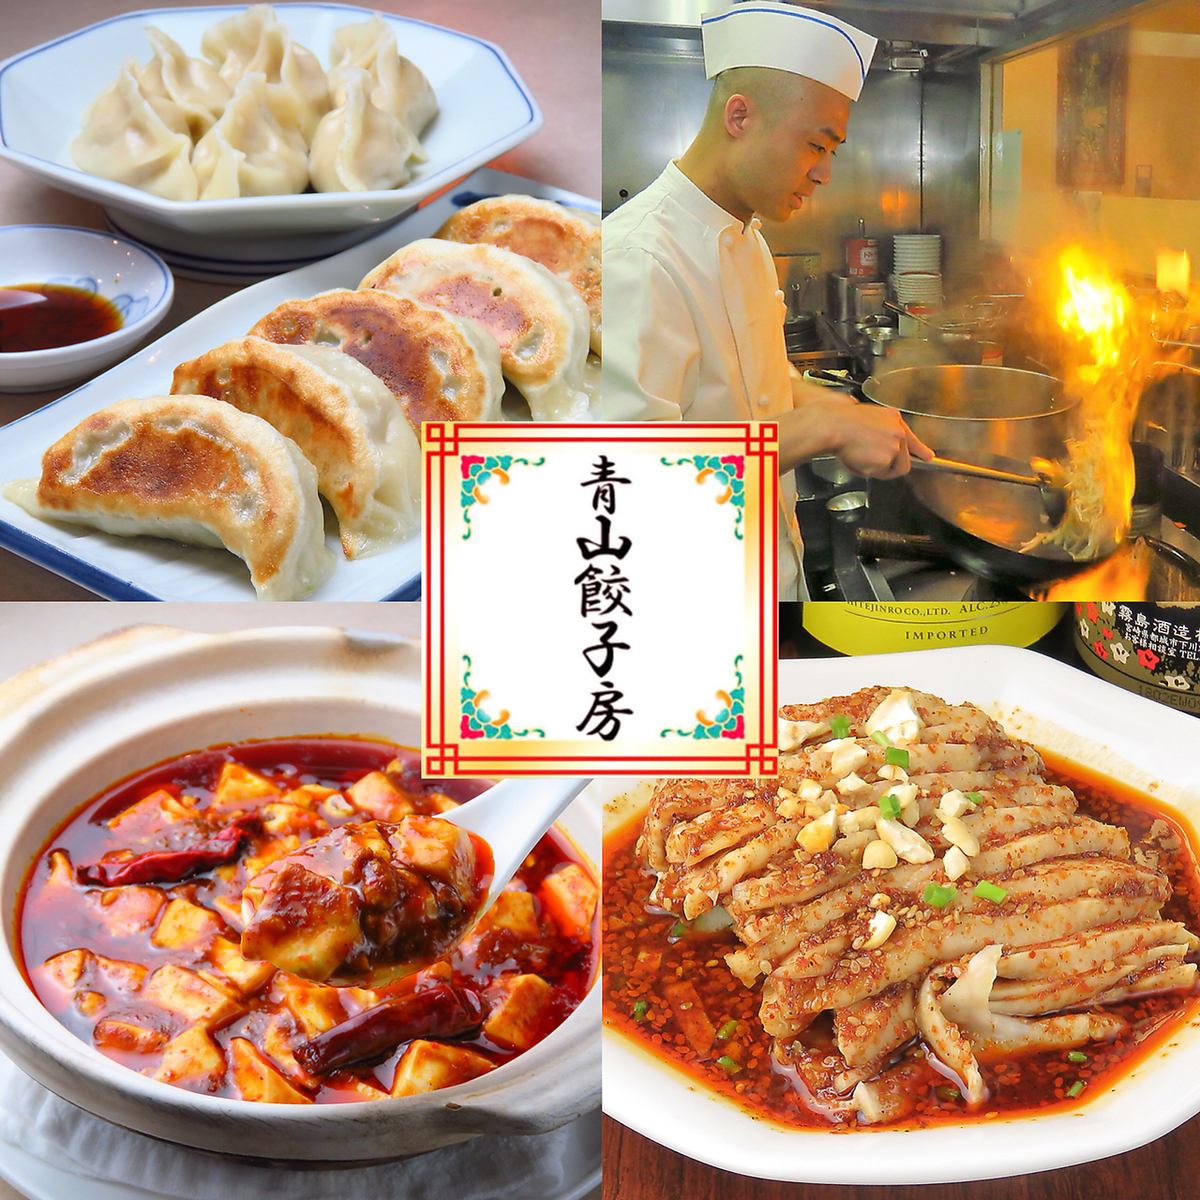 We are confident in authentic Chinese food! Handmade dumplings are a popular menu ☆